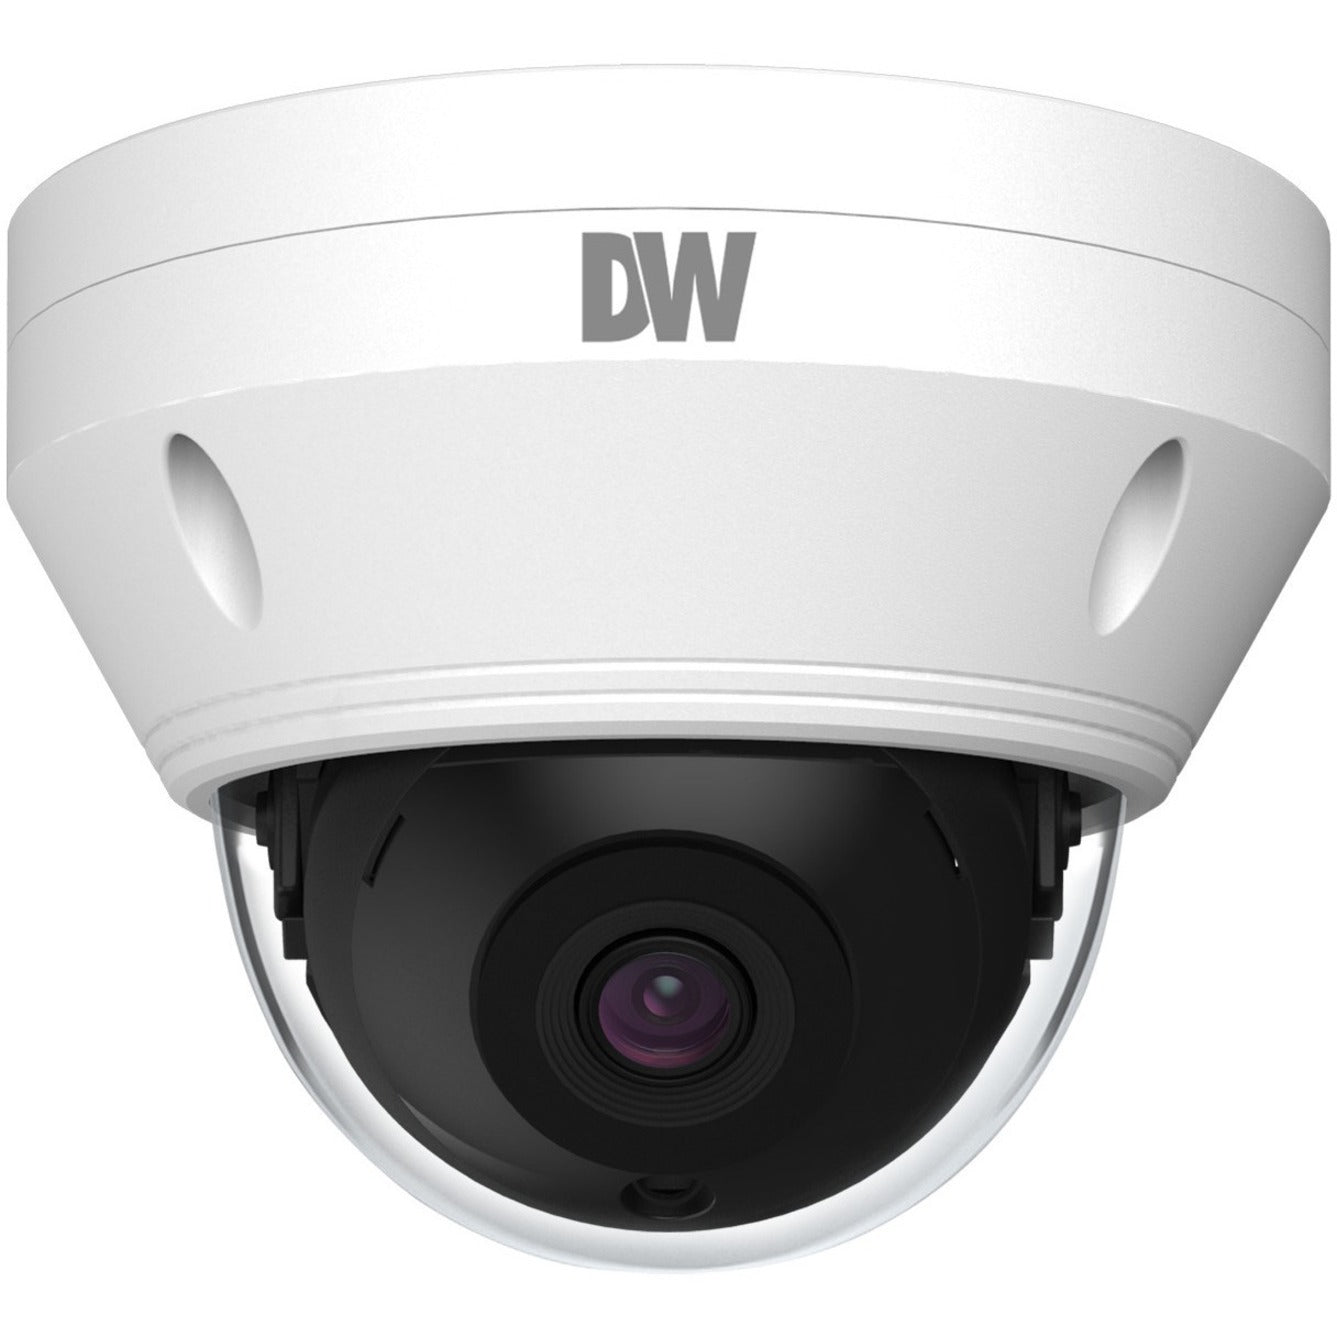 Digital Watchdog DWC-MV95WI28TW MEGAPIX 5MP Vandal Dome IP Camera with 2.8mm Lens, 98.5° Field of View, and 100 ft Night Vision